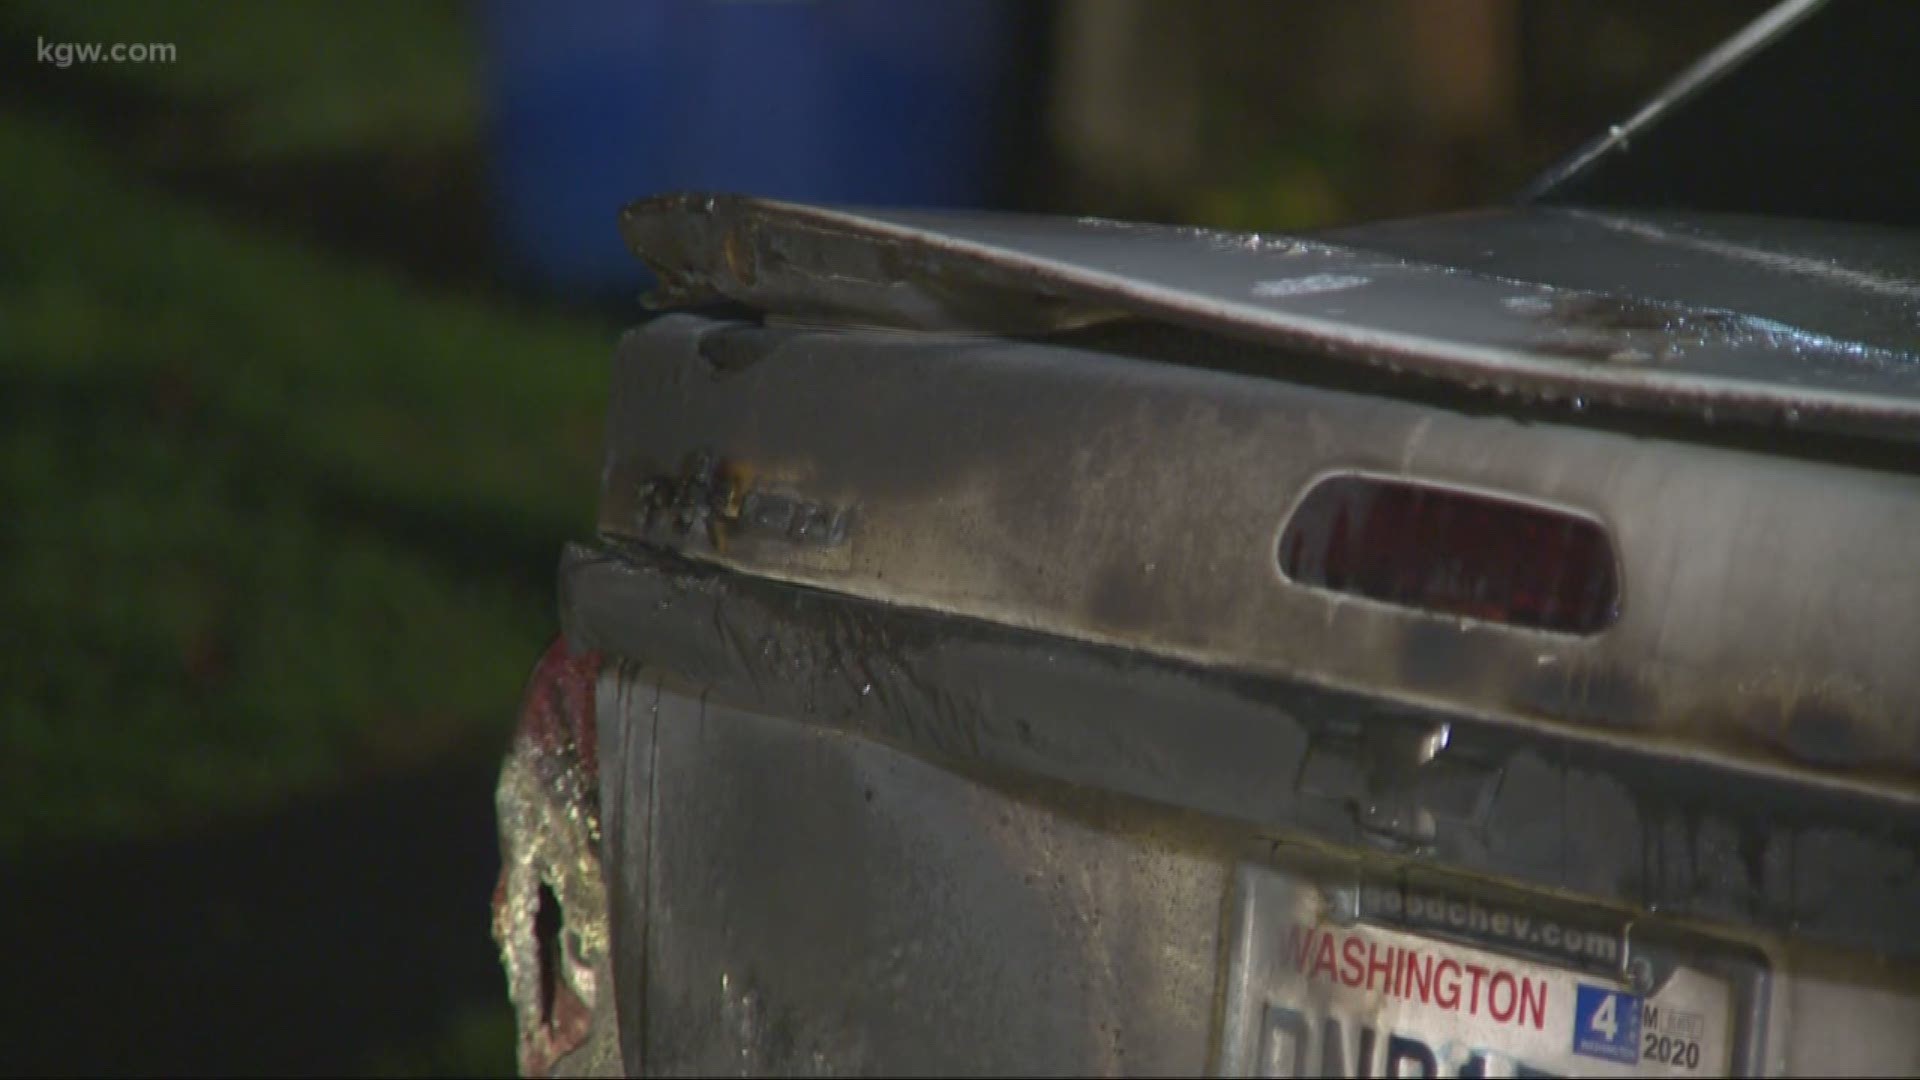 A home and car in Kelso were damaged in an arson over the weekend. One man’s car was completely burned.